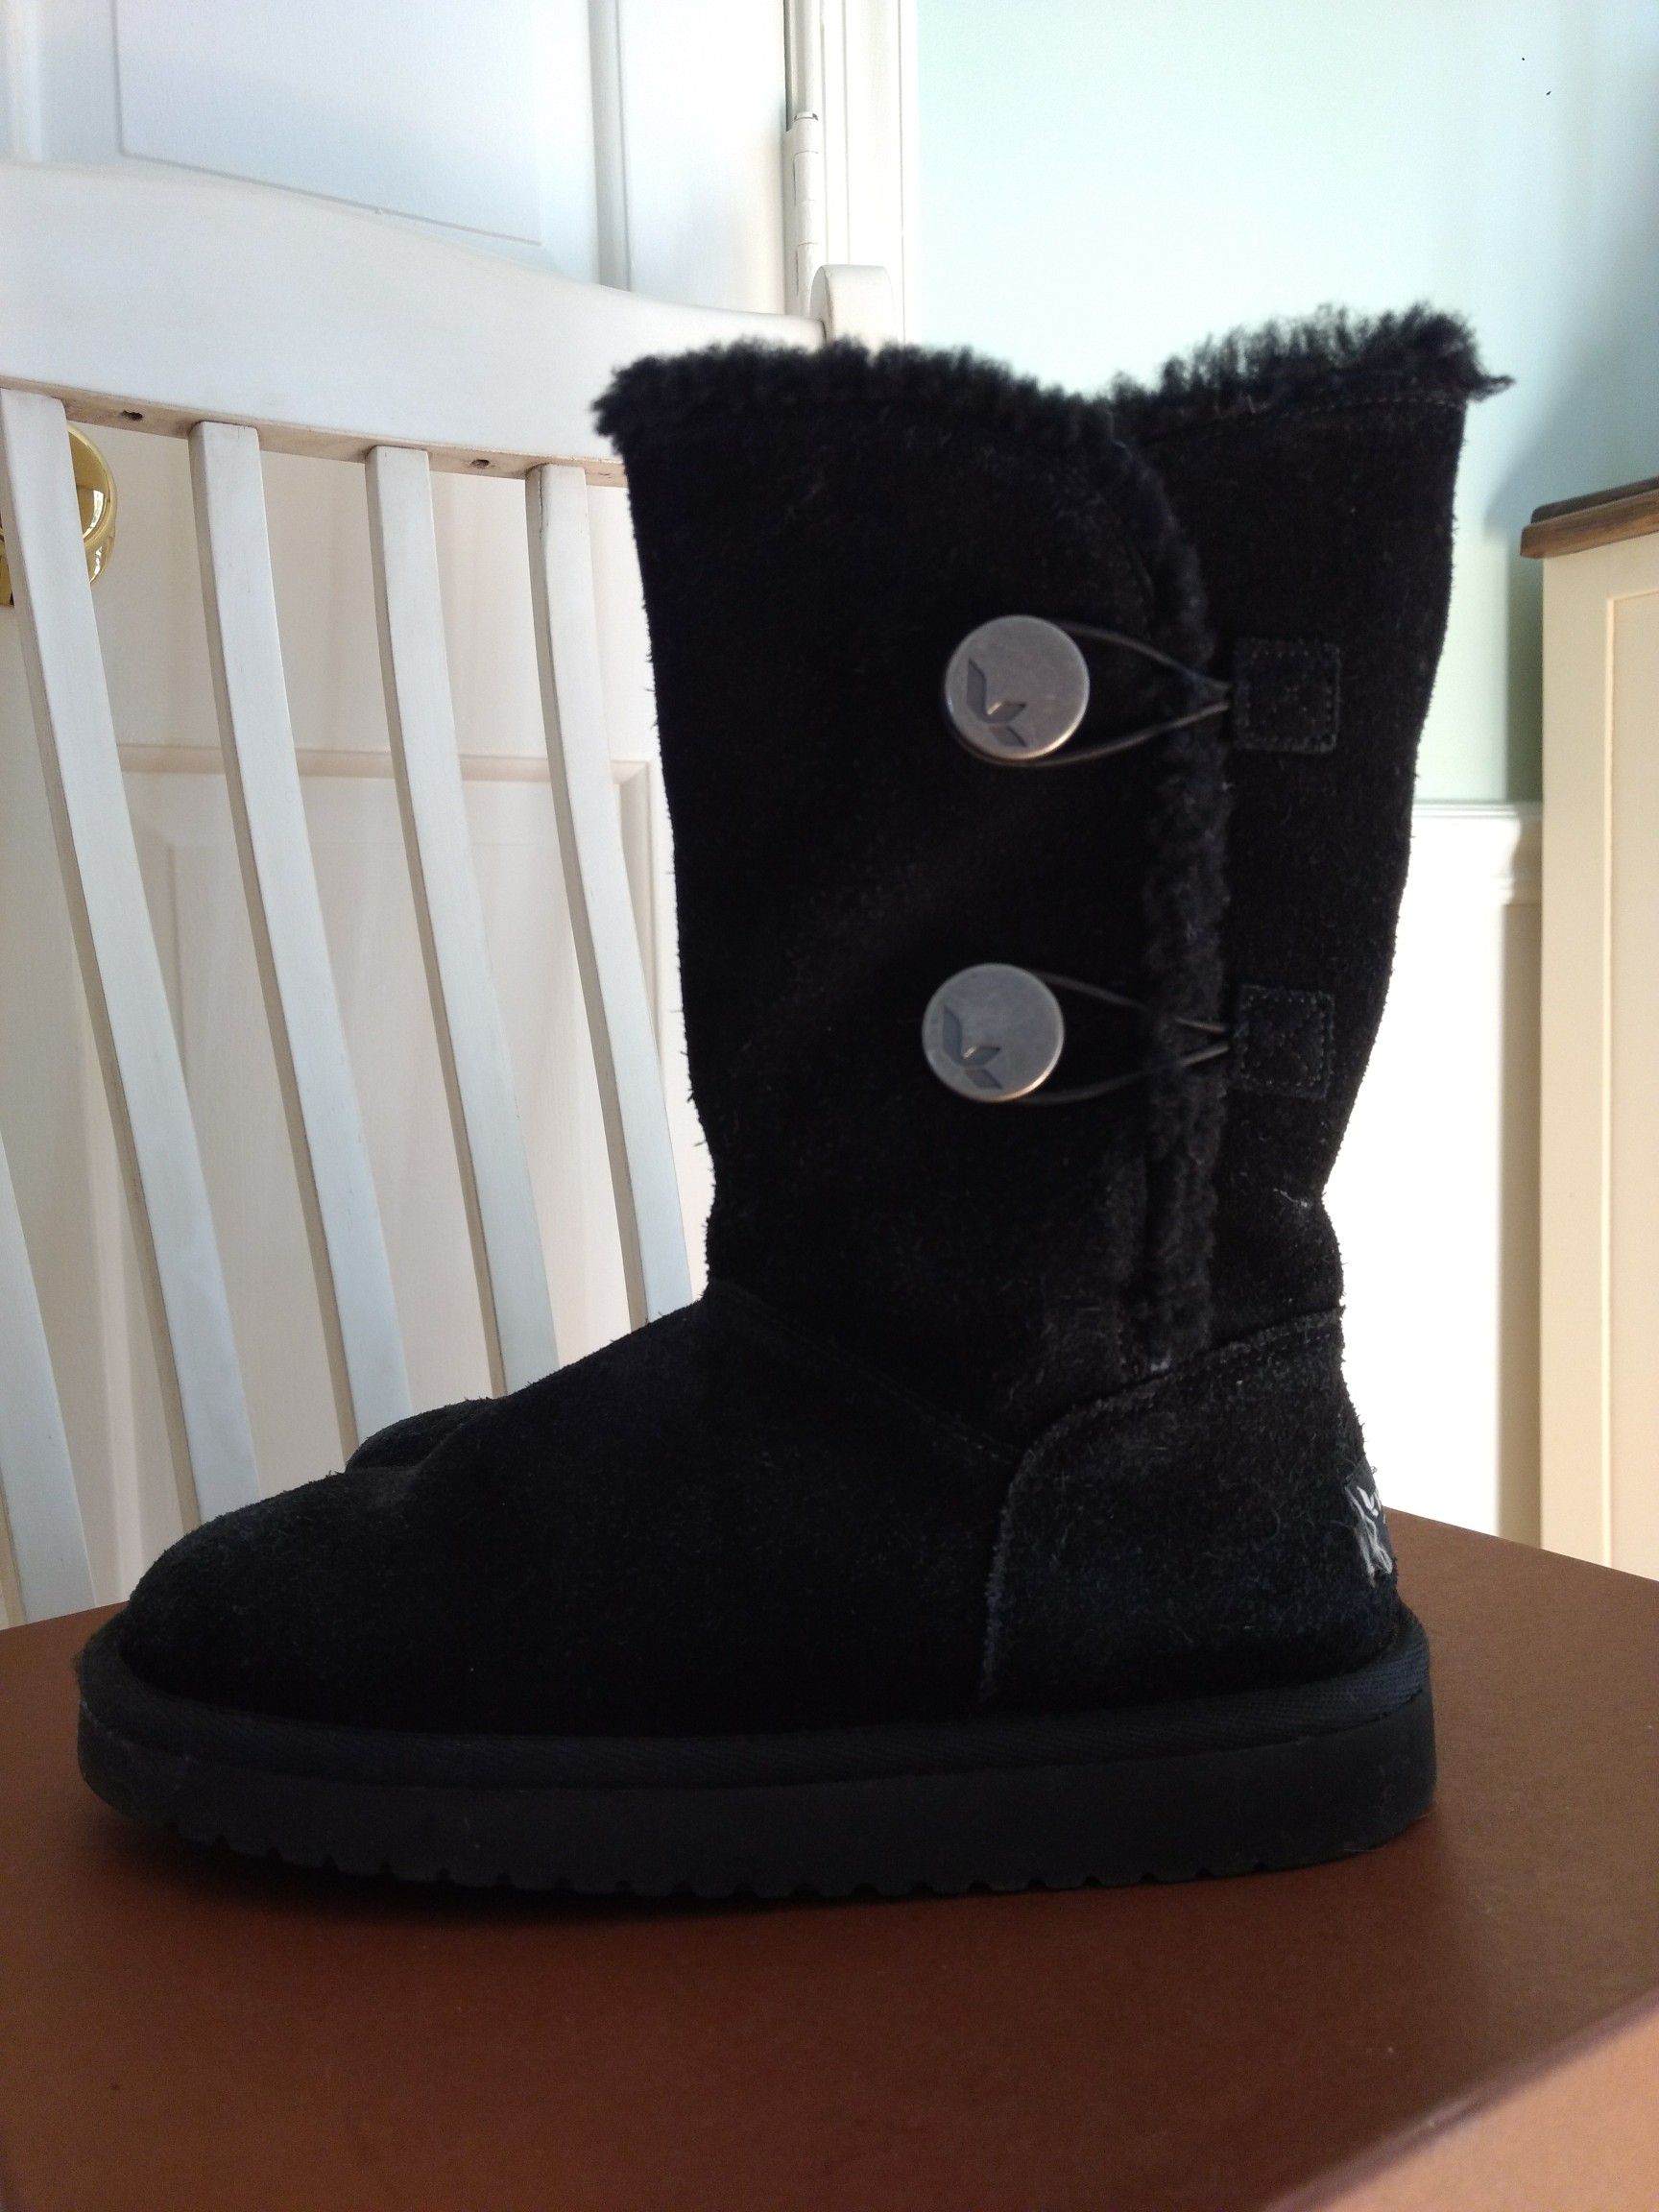 Boots, size 4-4,5, black, by UGG, from Nordstrom.